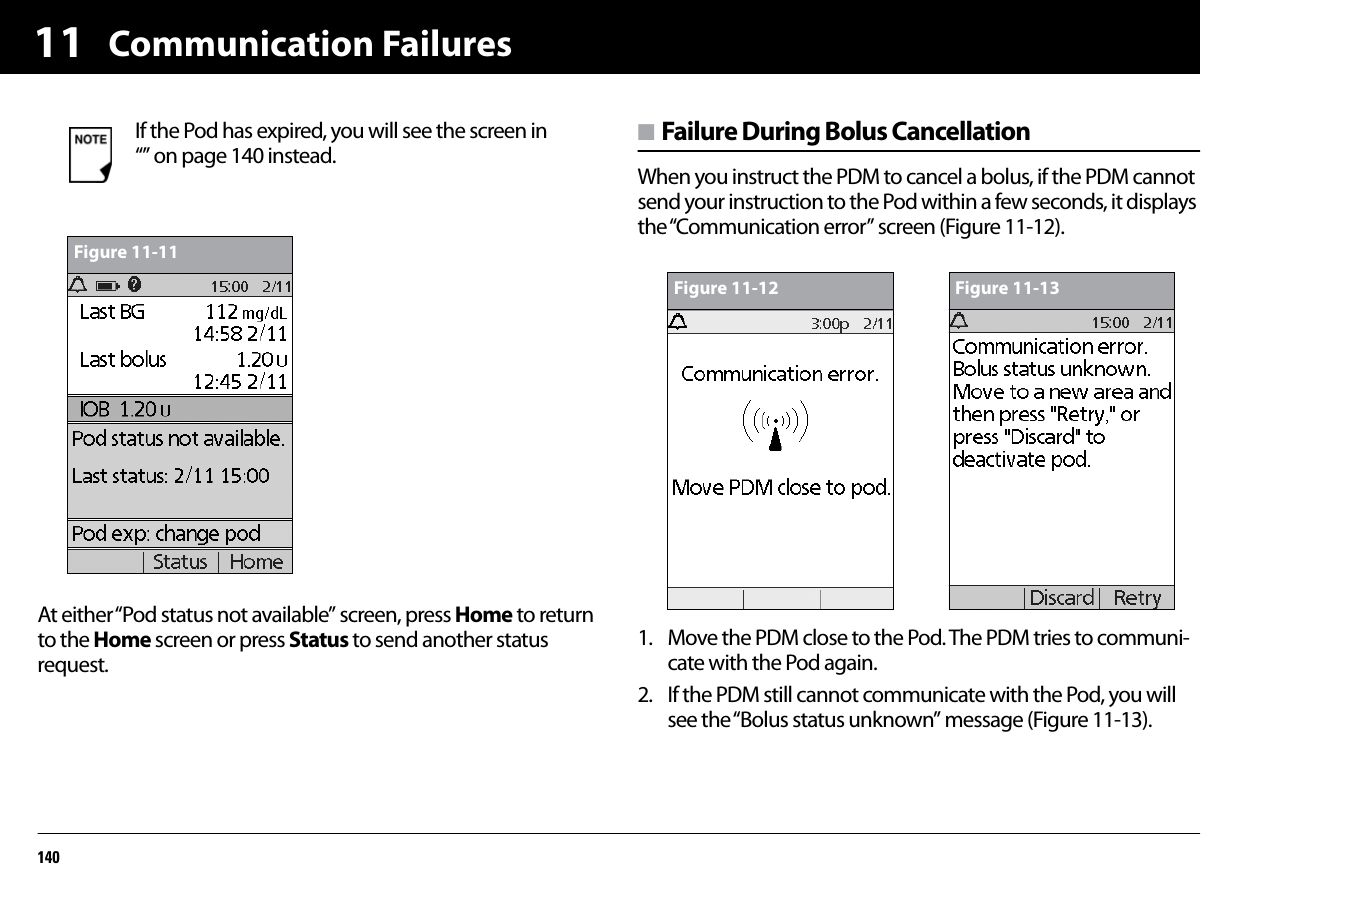 Communication Failures14011At either “Pod status not available” screen, press Home to return to the Home screen or press Status to send another status request.n Failure During Bolus CancellationWhen you instruct the PDM to cancel a bolus, if the PDM cannot send your instruction to the Pod within a few seconds, it displays the “Communication error” screen (Figure 11-12).1. Move the PDM close to the Pod. The PDM tries to communi-cate with the Pod again.2. If the PDM still cannot communicate with the Pod, you will see the “Bolus status unknown” message (Figure 11-13). If the Pod has expired, you will see the screen in “” on page 140 instead.Figure 11-11Figure 11-12 Figure 11-13